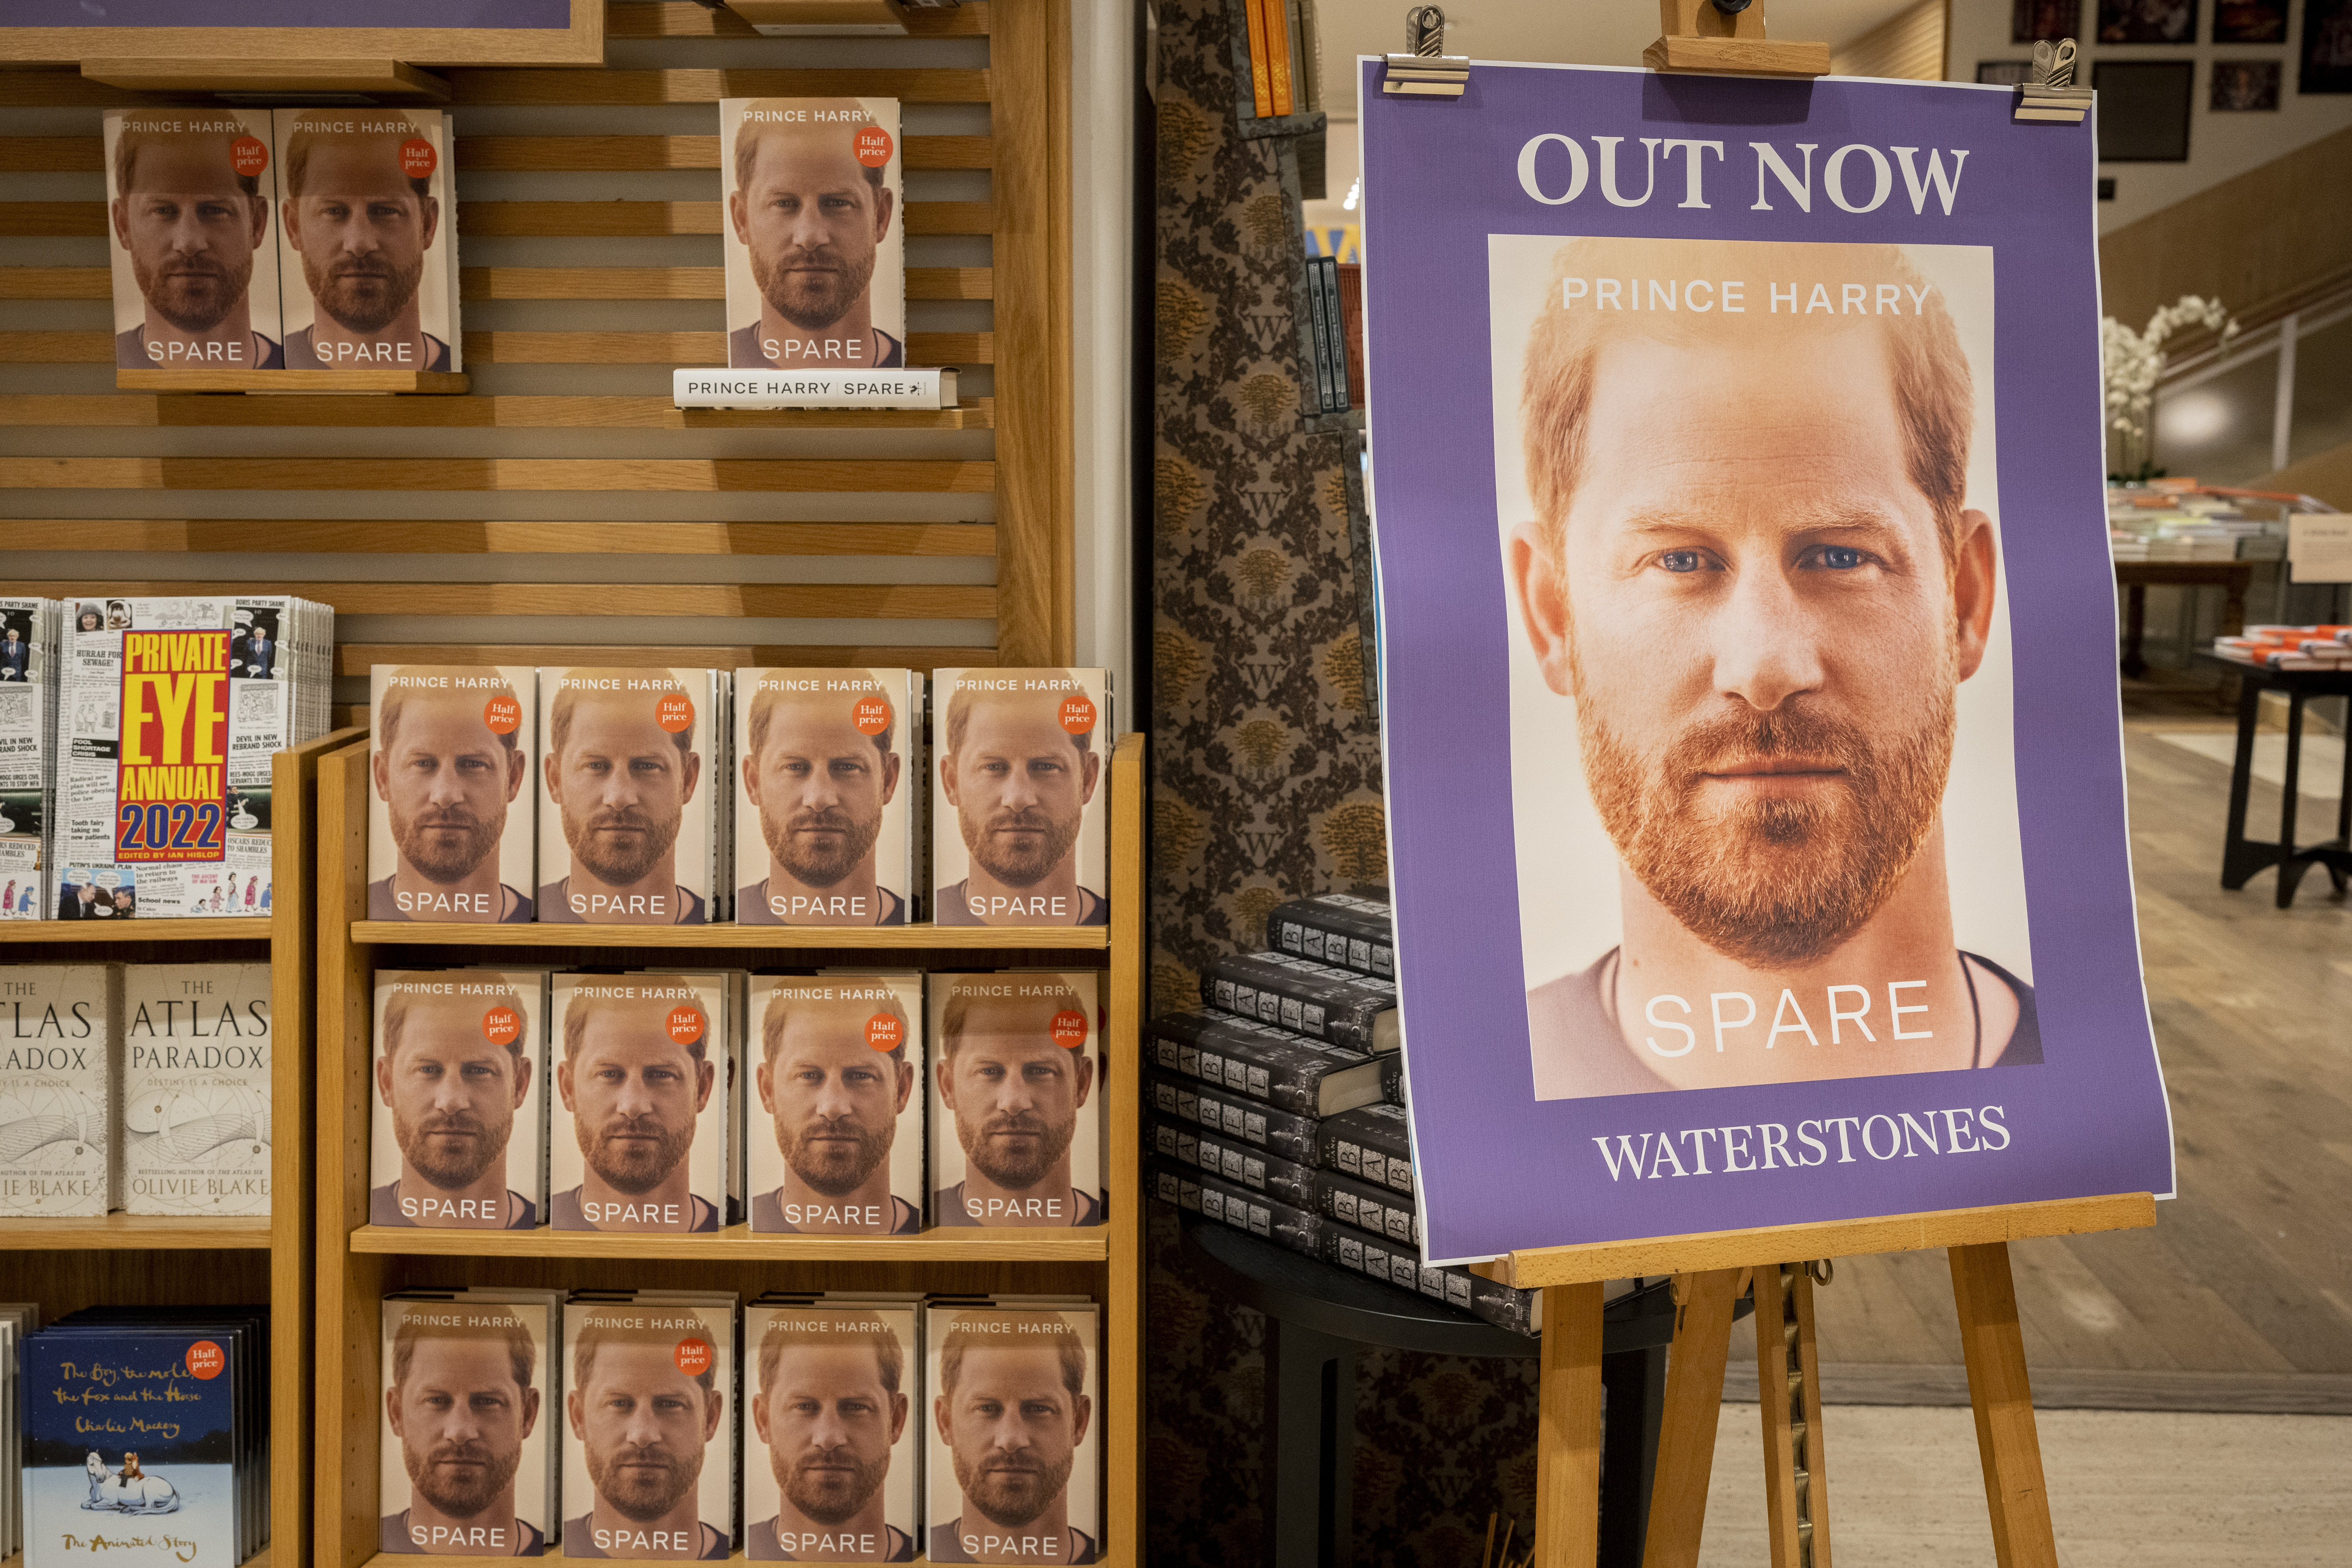 Copies of "Spare" and a poster at Waterstones bookstore in London, England on January 10, 2023 | Source: Getty Images